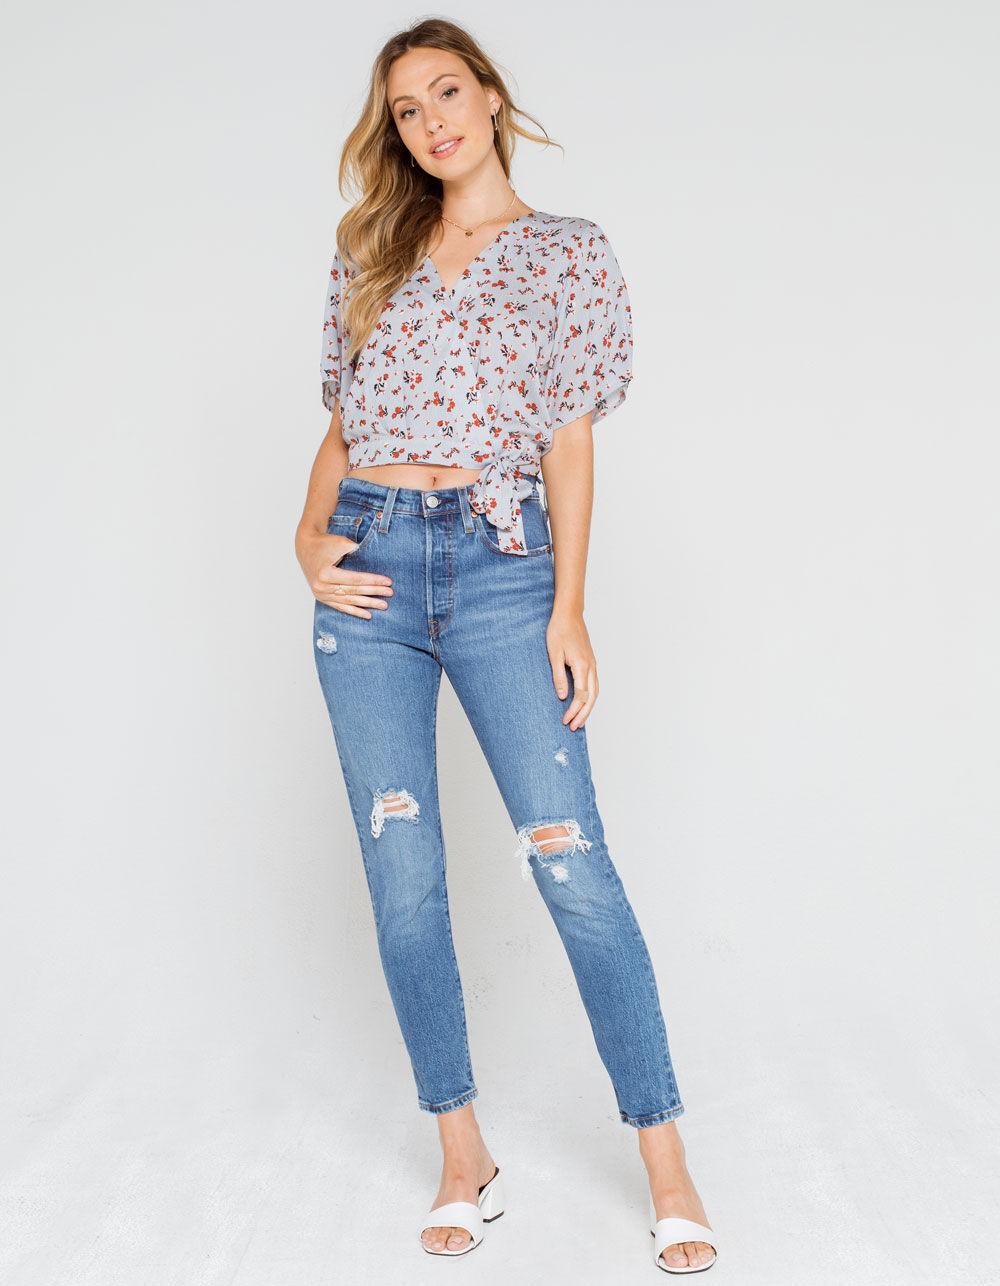 SKY AND SPARROW Scattered Floral Womens Surplice Top - LTBLU | Tillys